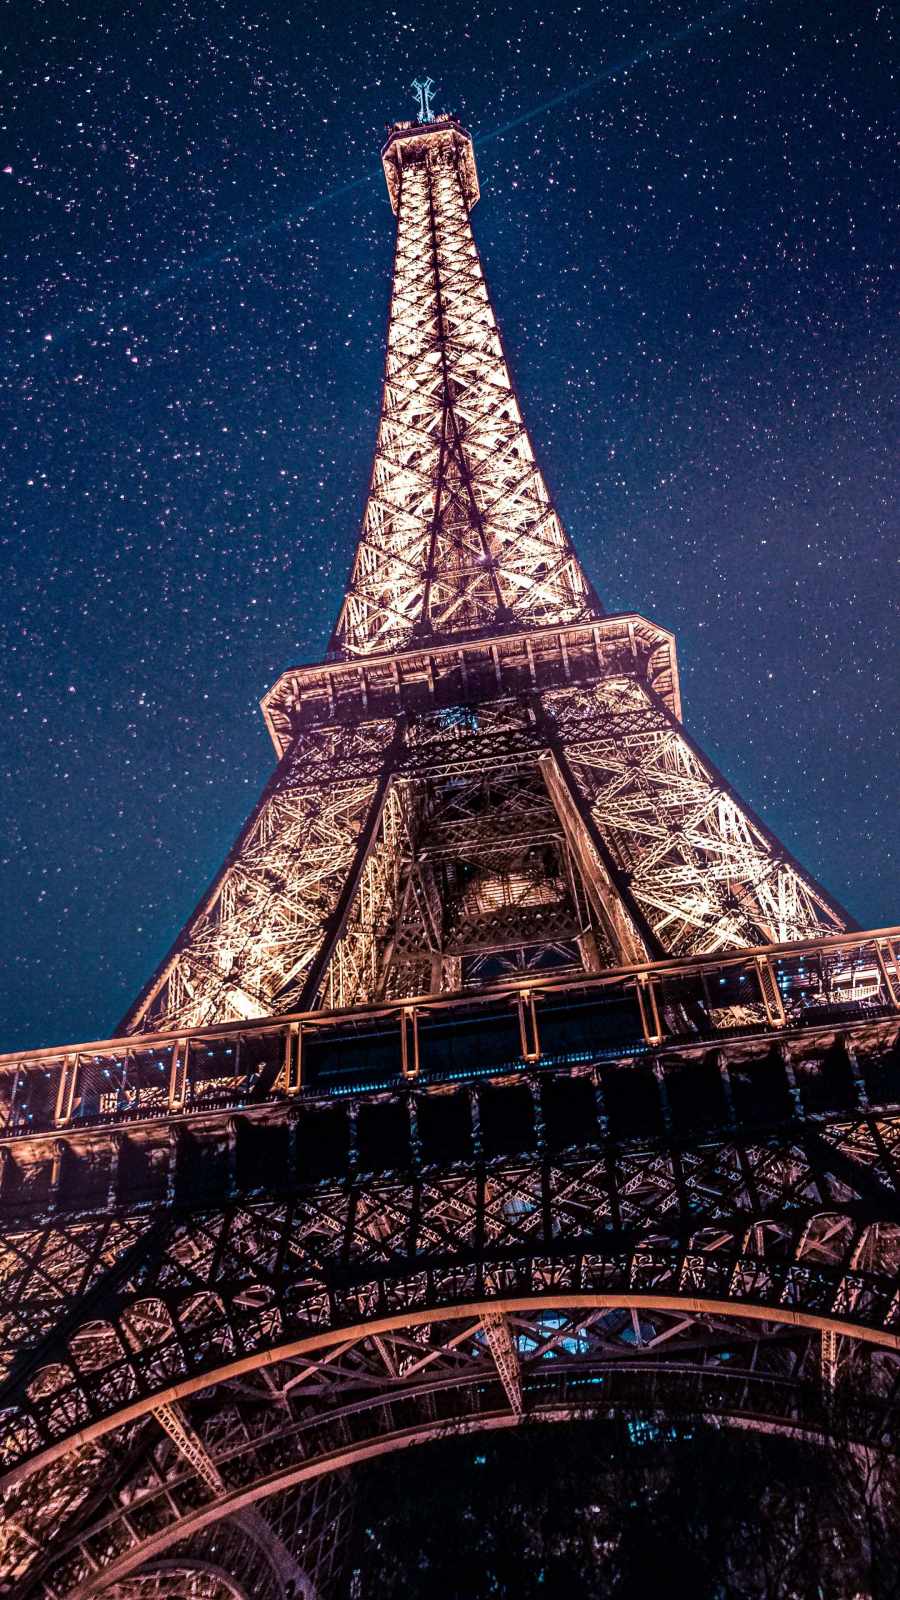 The eiffel tower at night with stars in background - Paris, Eiffel Tower